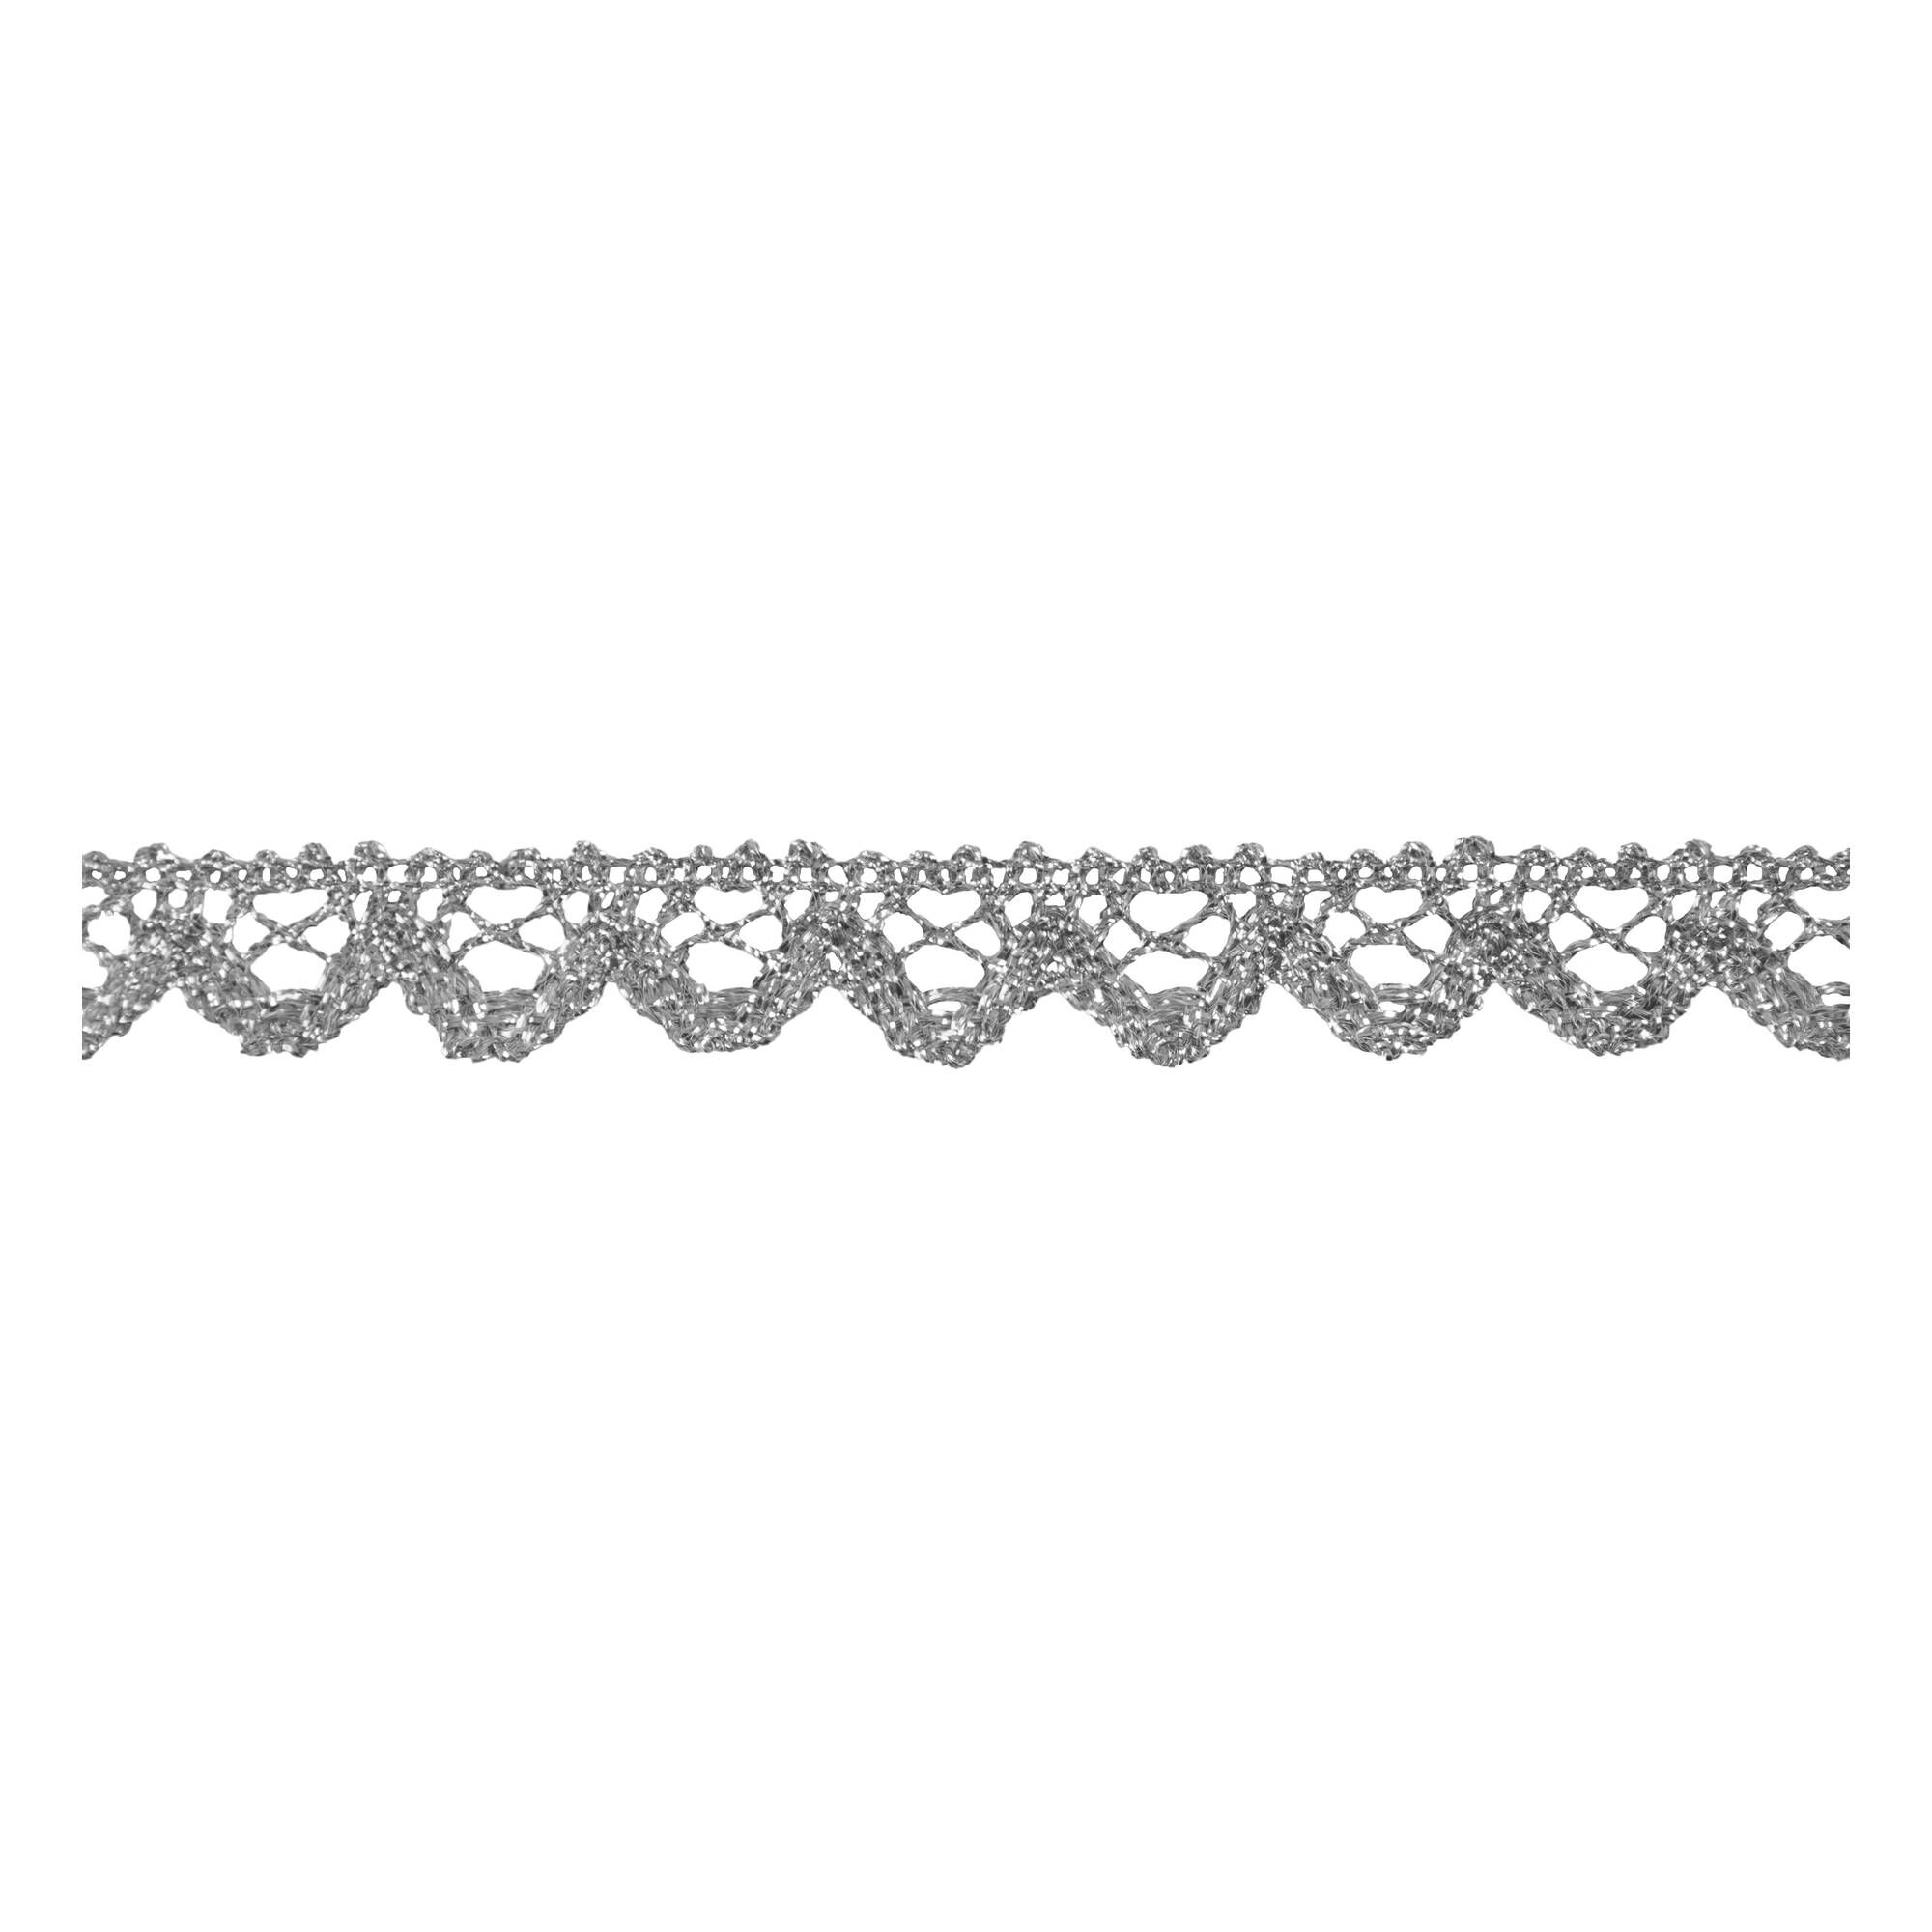 Silver 16mm Metallic Lace Trim by the Metre | Hobbycraft